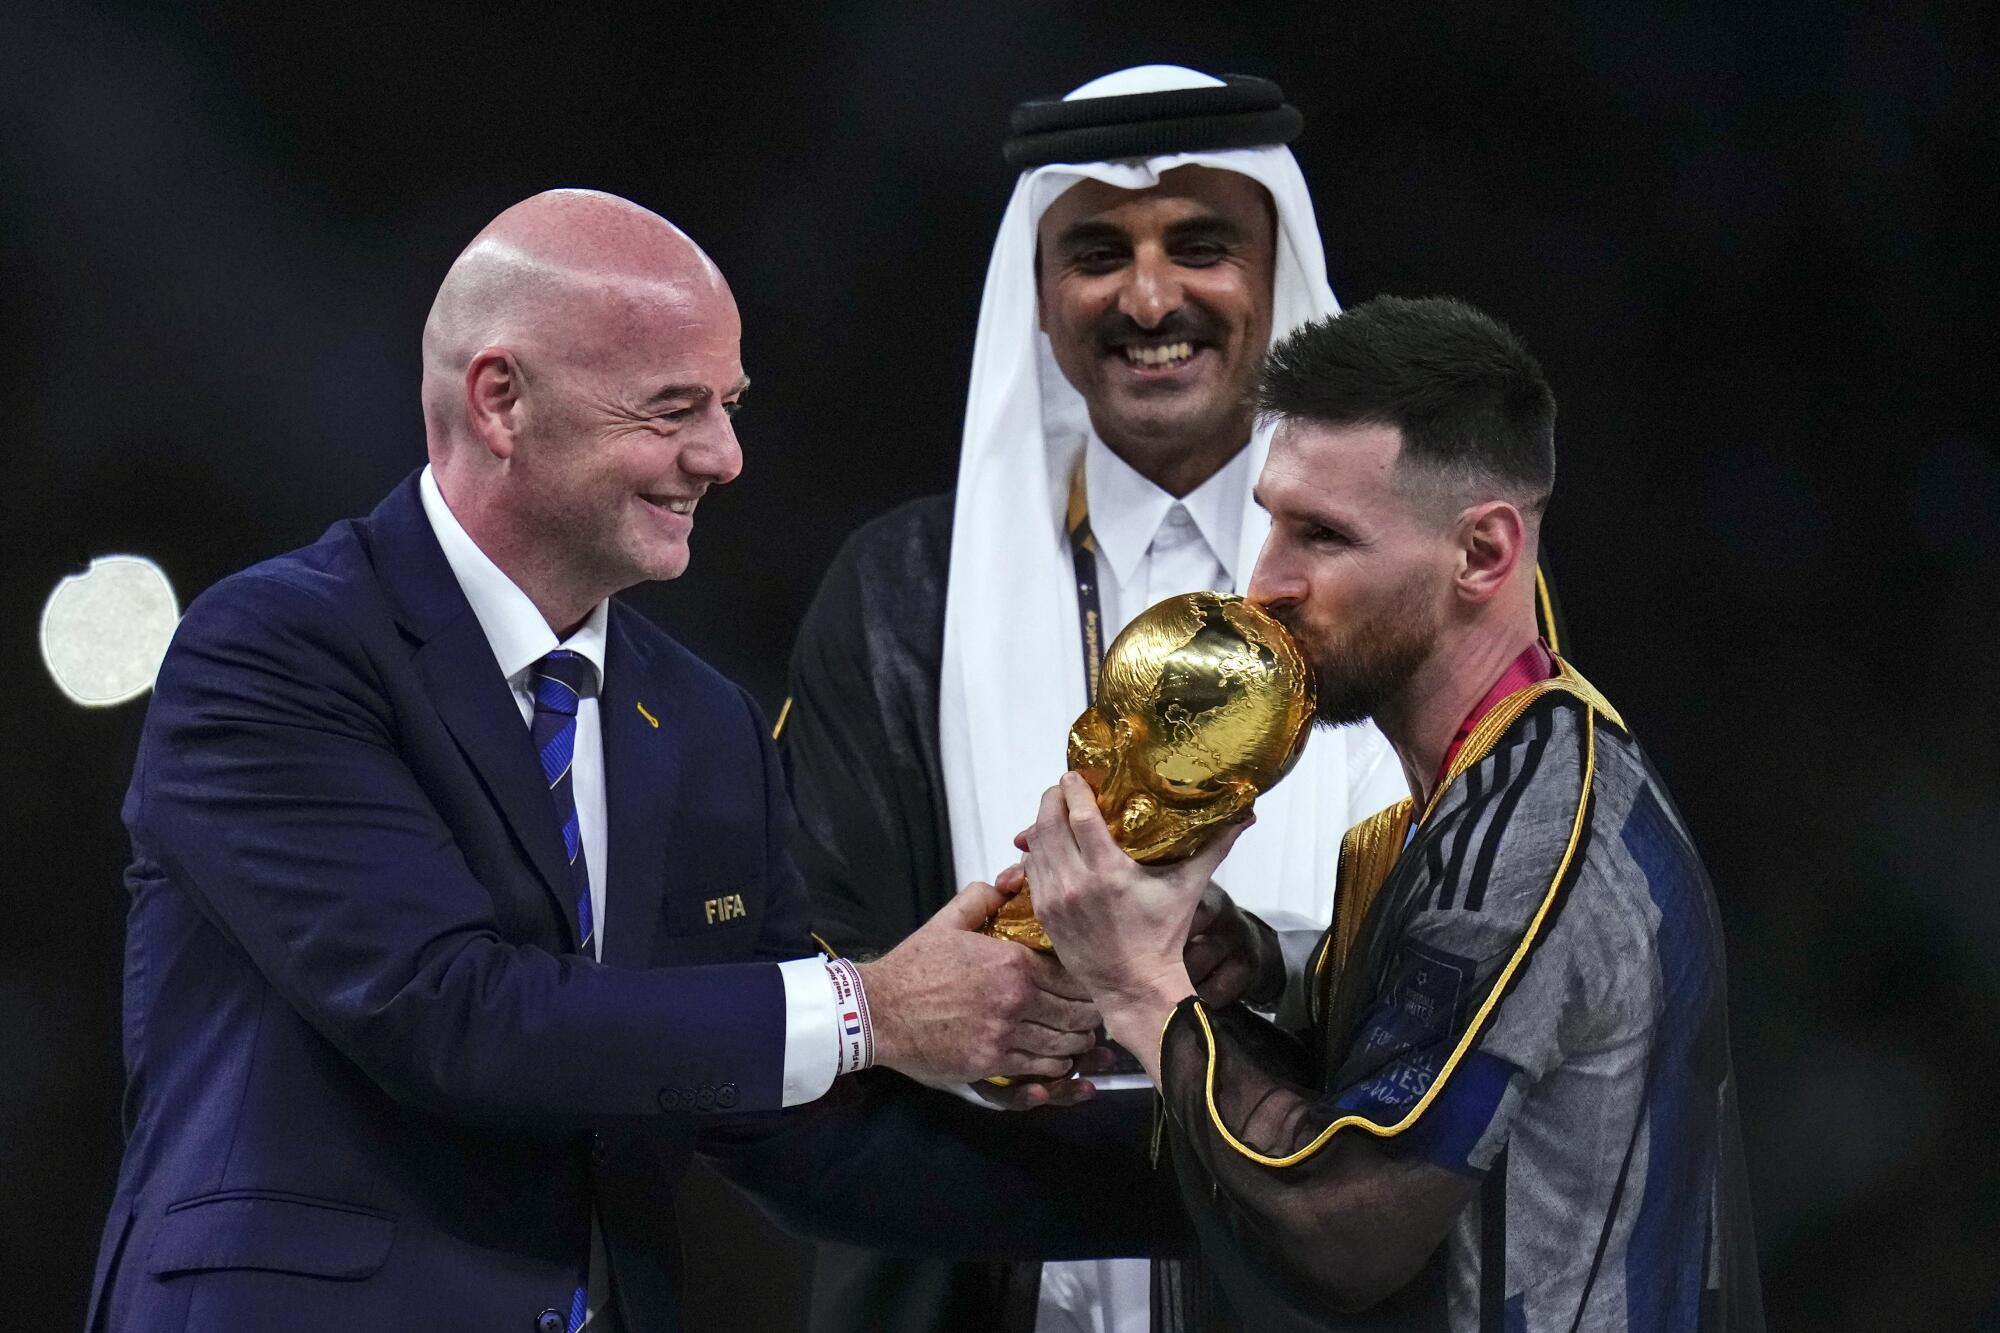 The FIFA World Cup and the Human Rights situation in Qatar - FIFPRO World  Players' Union